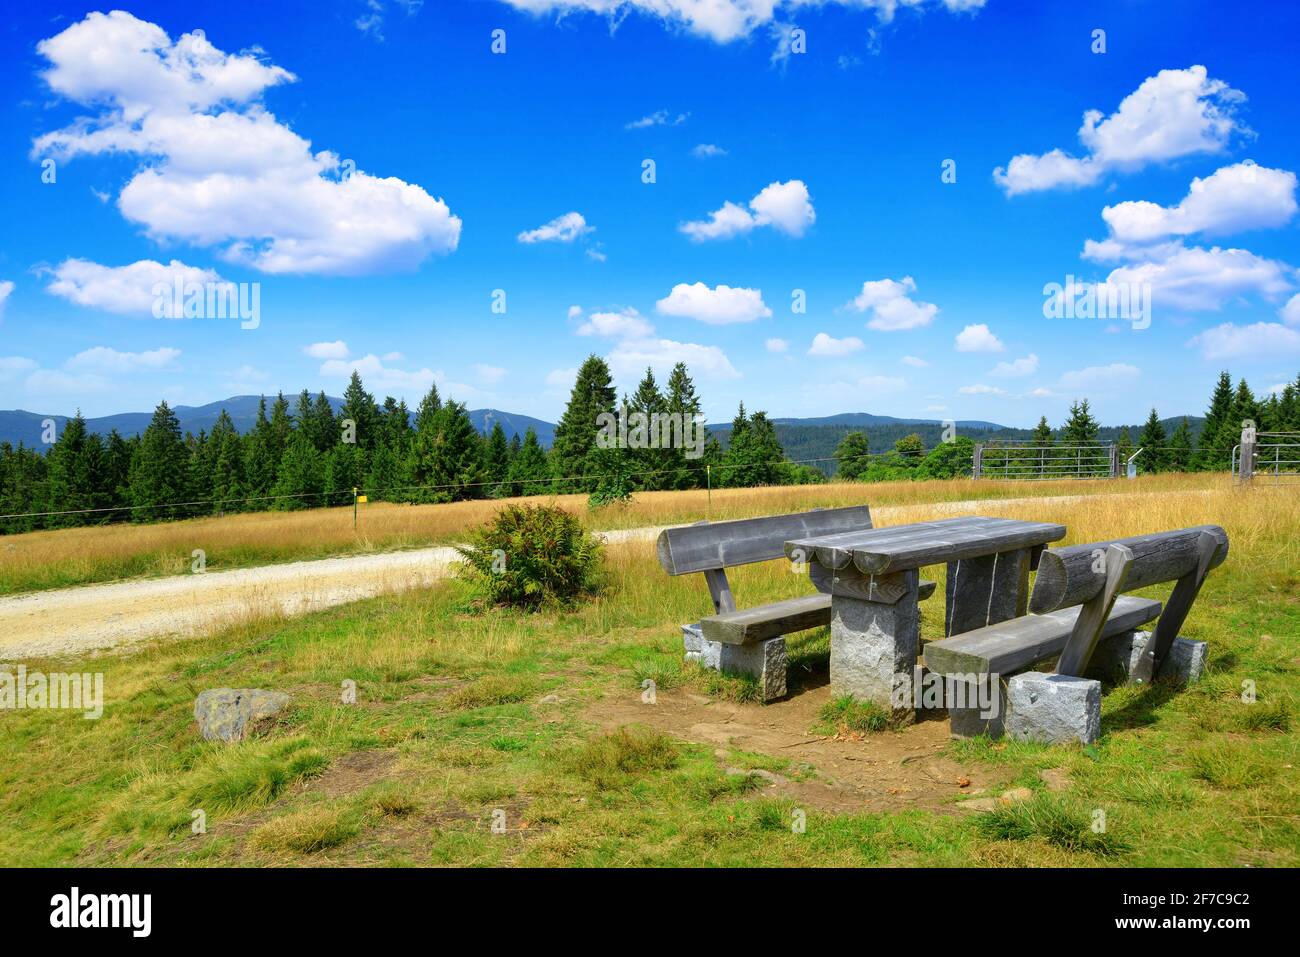 Landscape in the national park Bayerischer wald. Germany. Stock Photo